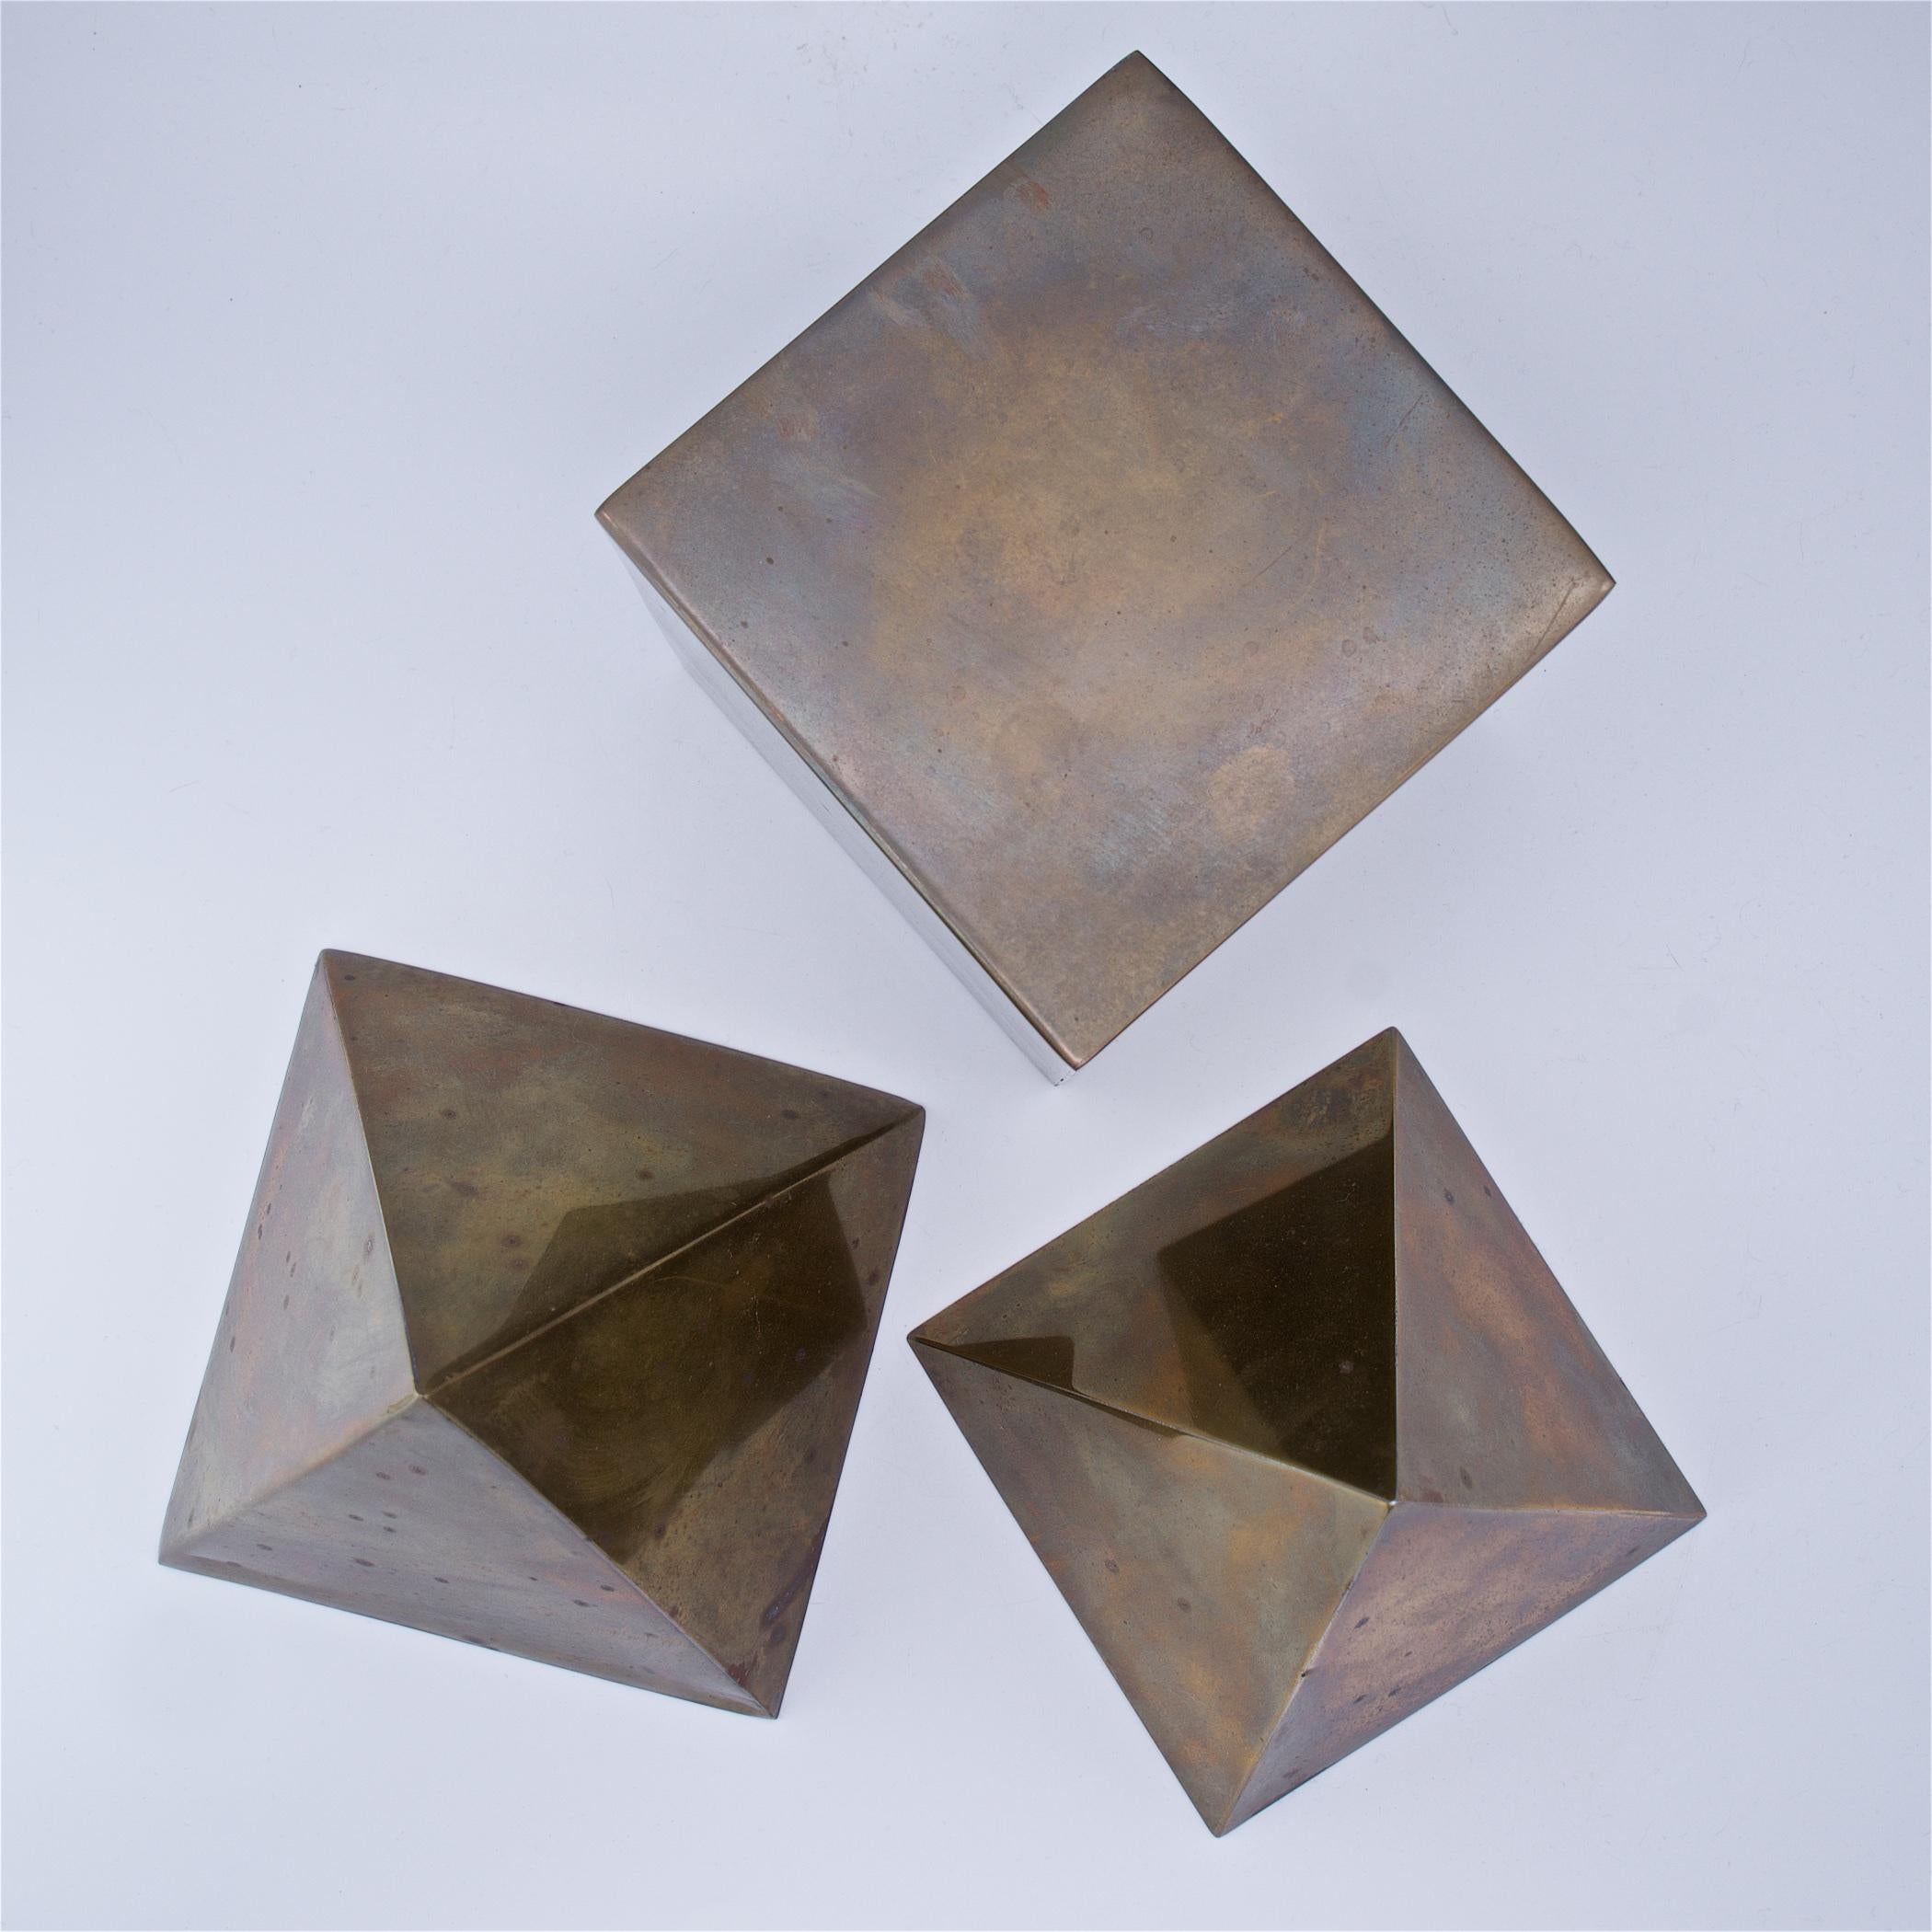 Post-Modern Vintage 1970s Brass Geometric Table Sculptures Pyramid Cube Mid-Century, Italy For Sale